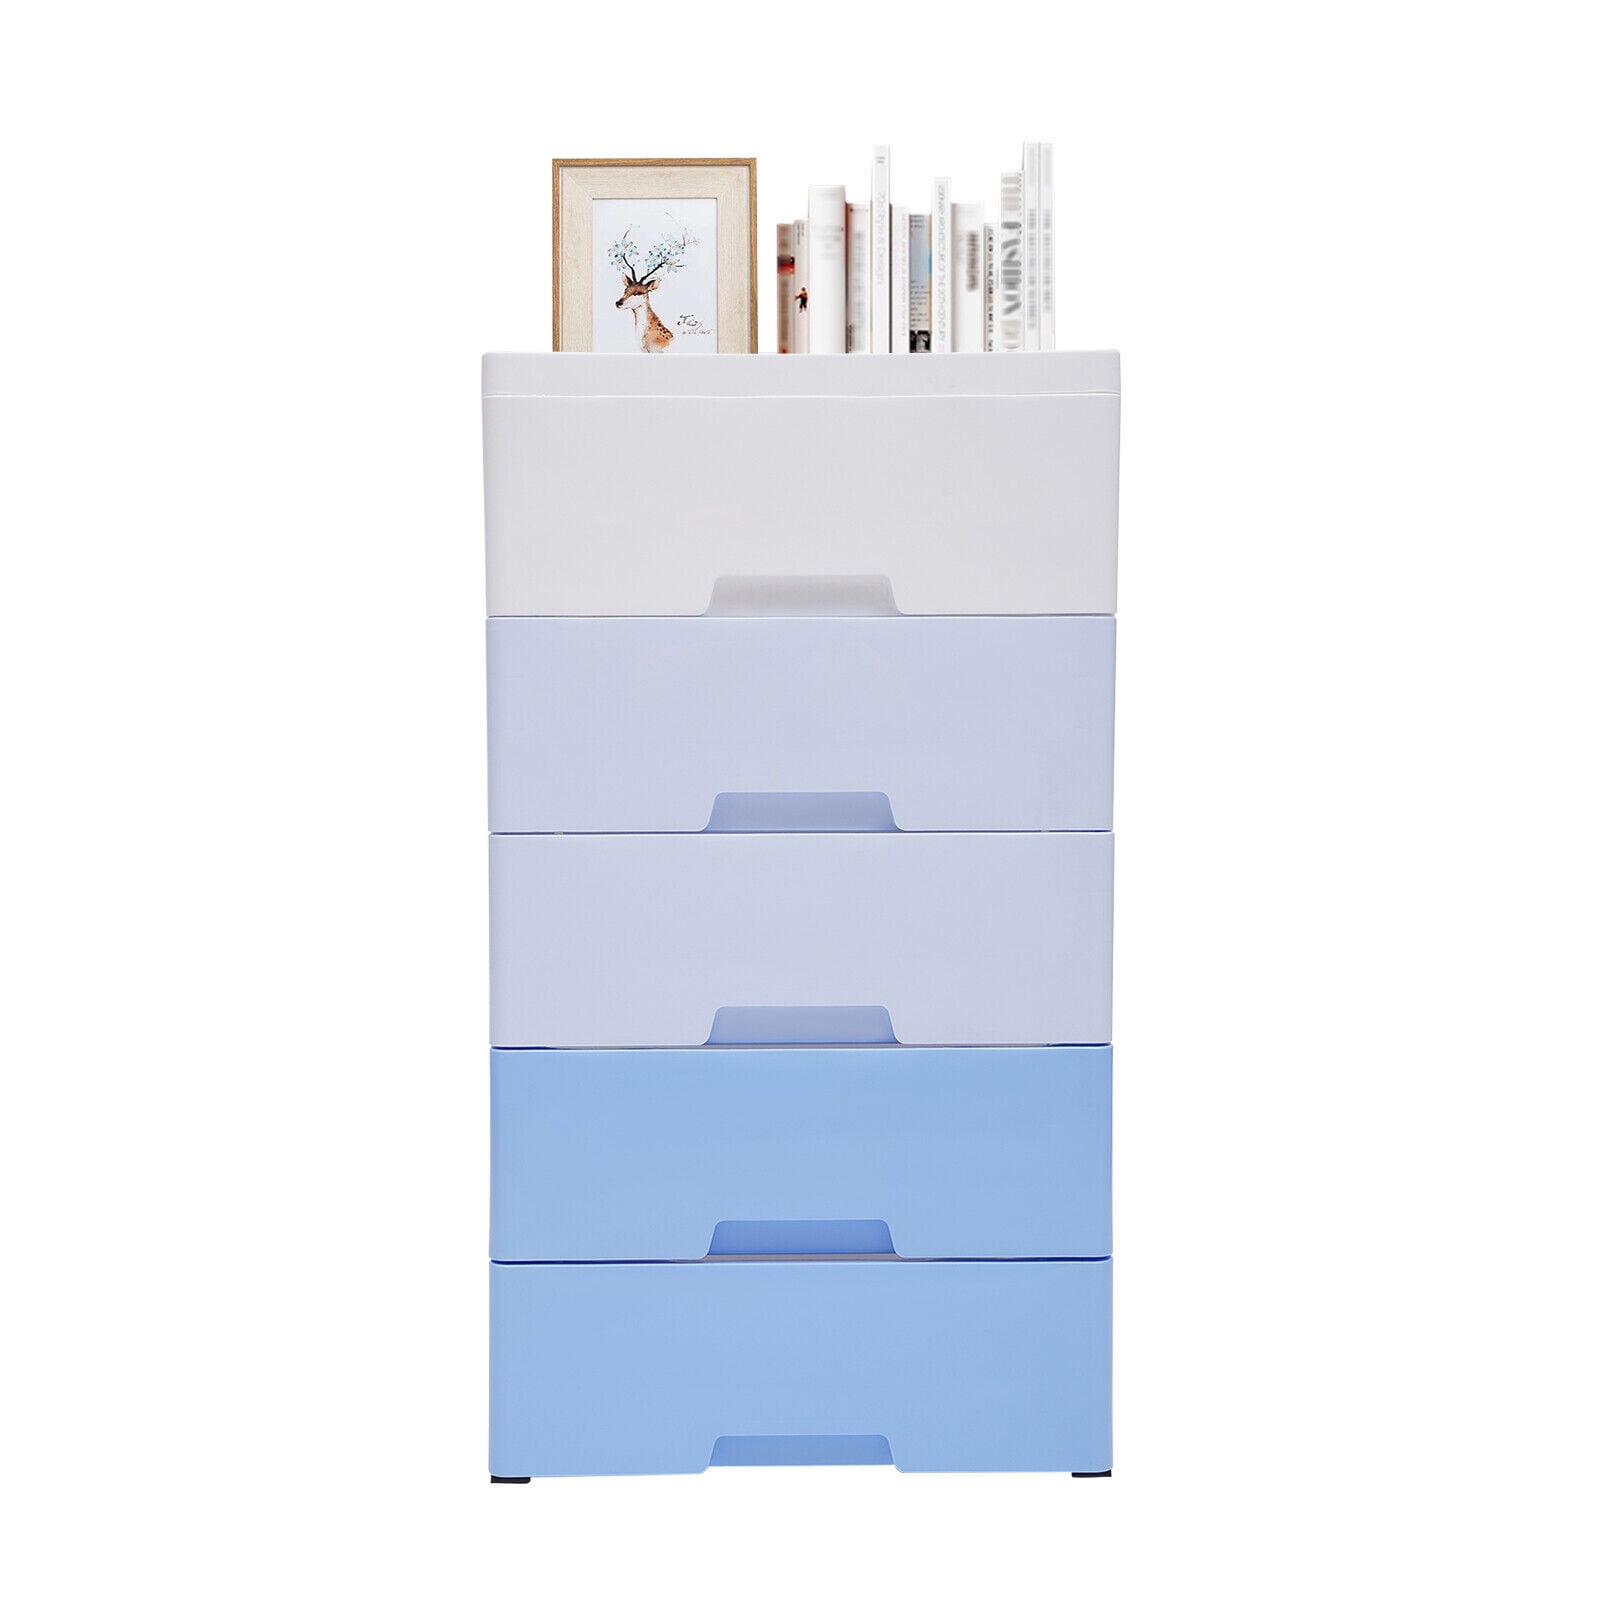 OUKANING 5 Tier Stackable Storage Cabinets Plastic Wardrobe ...